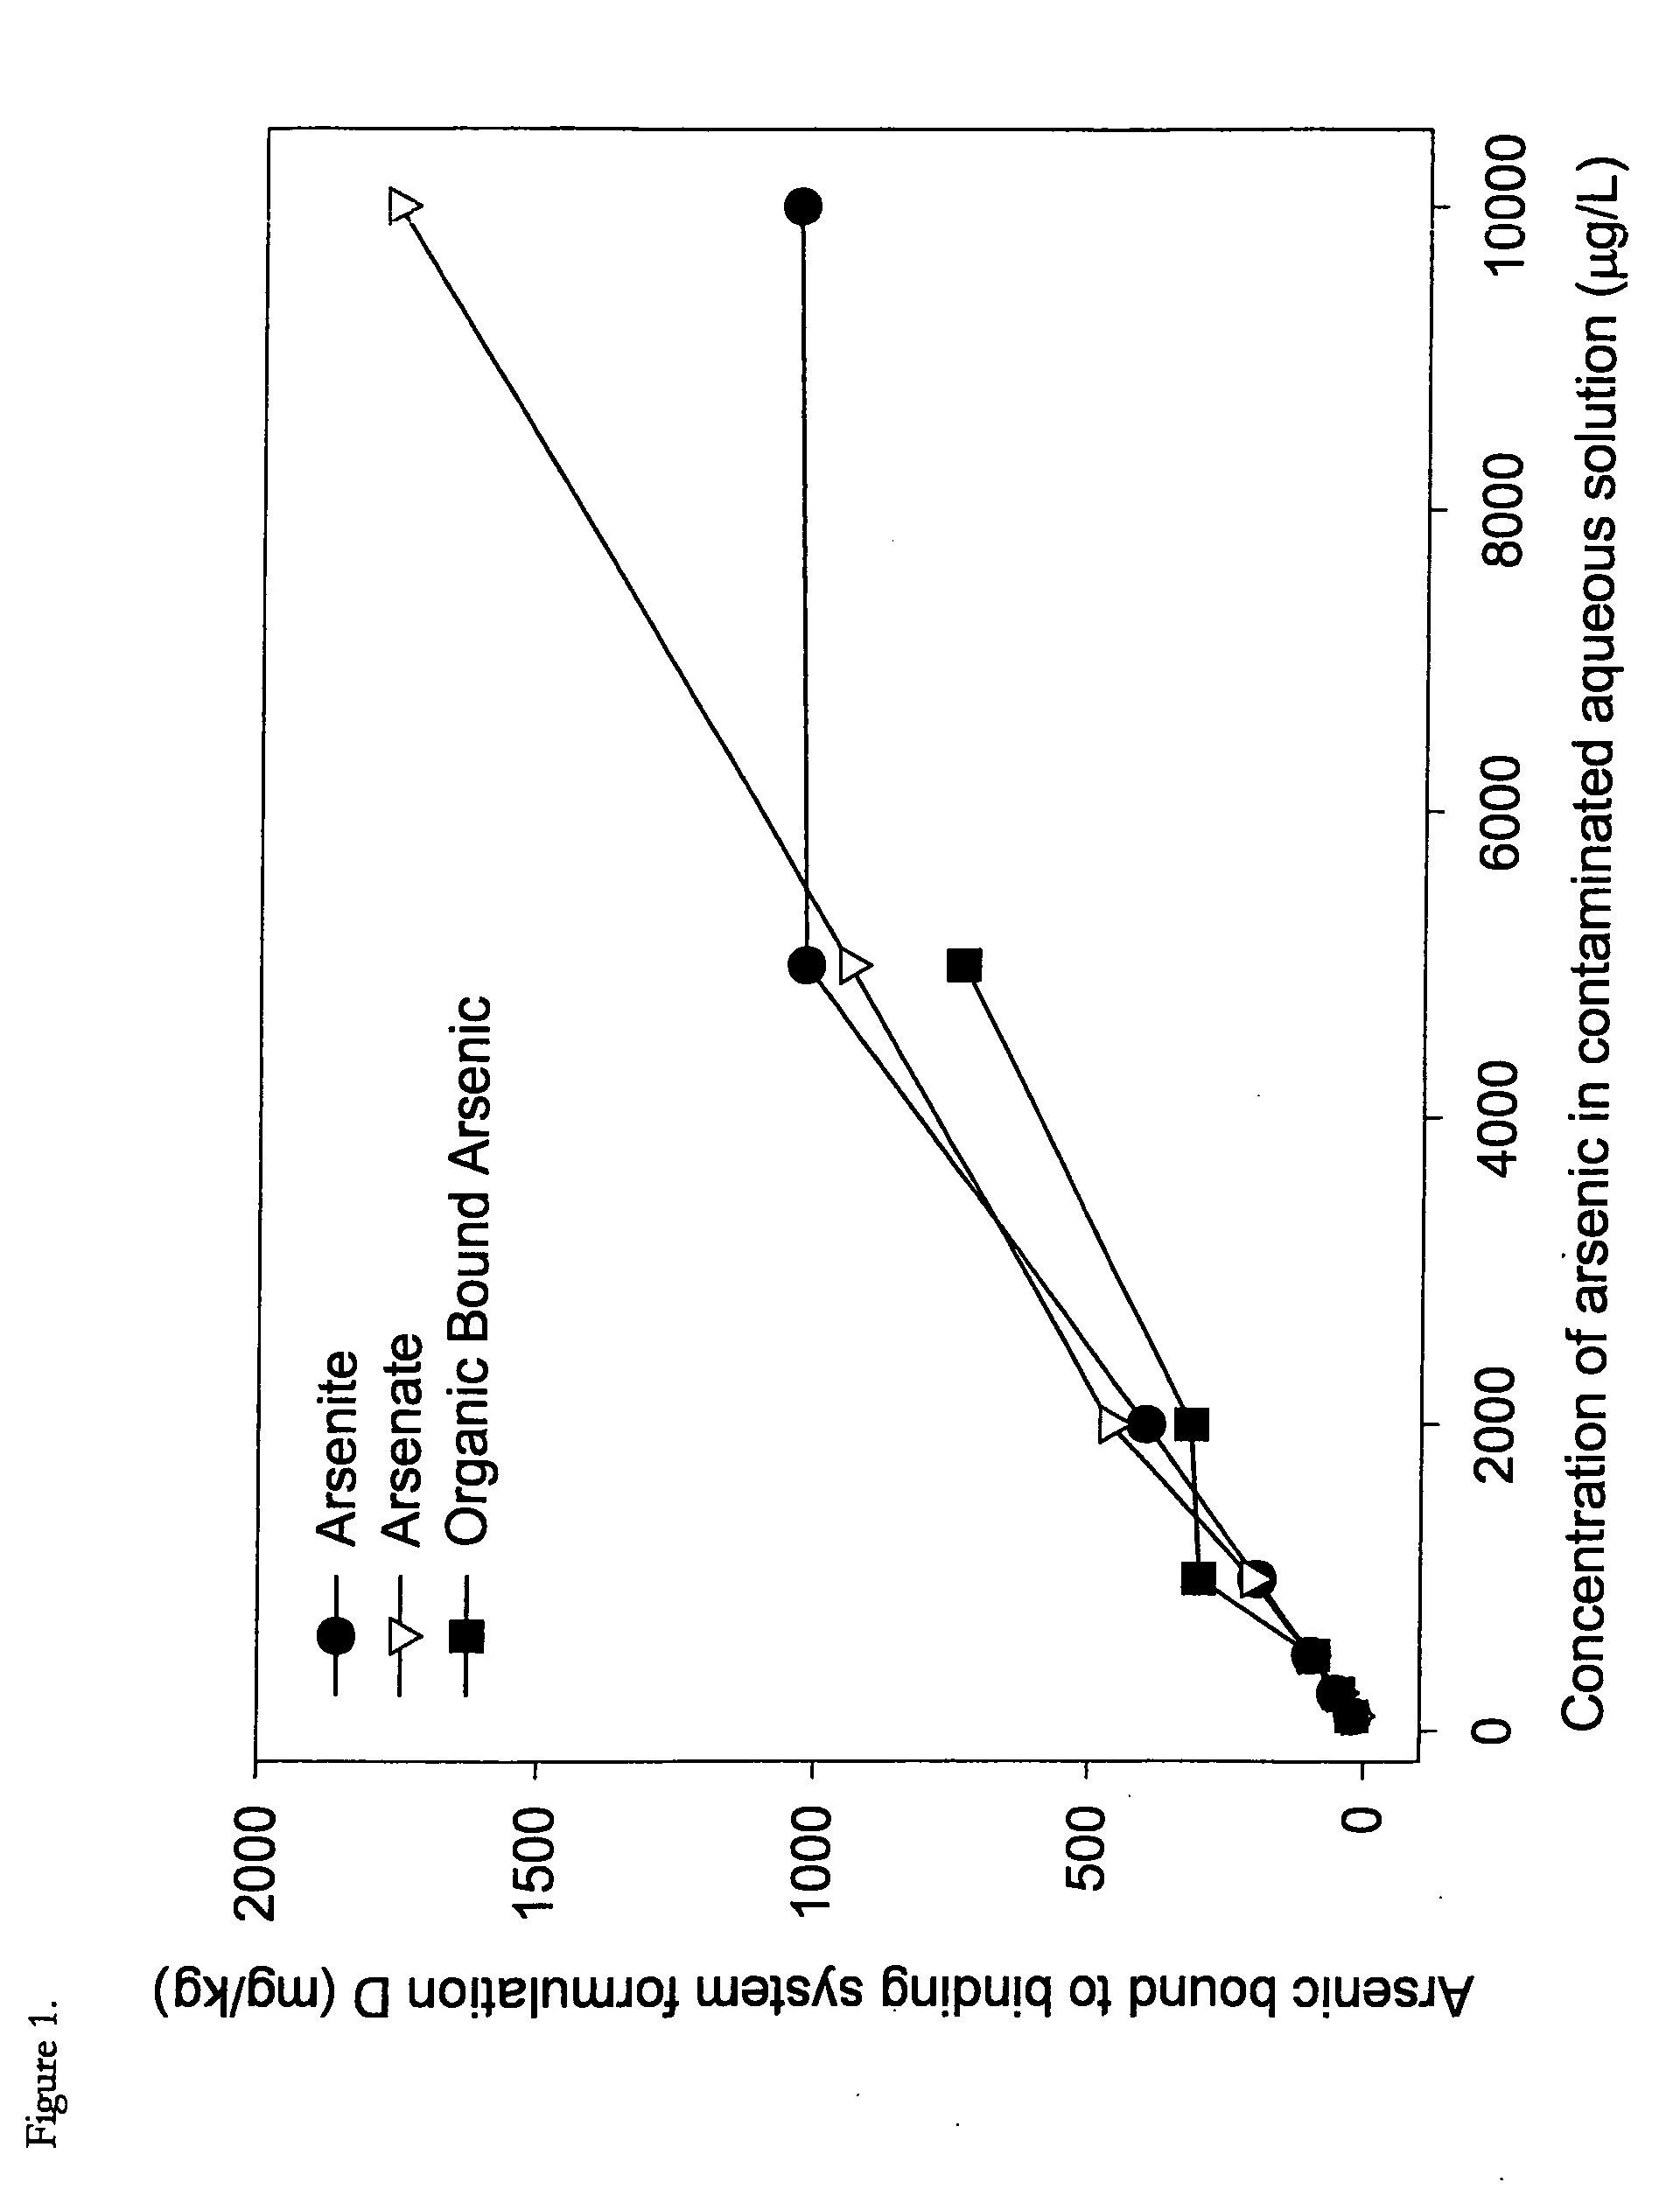 Method and material for water treatment